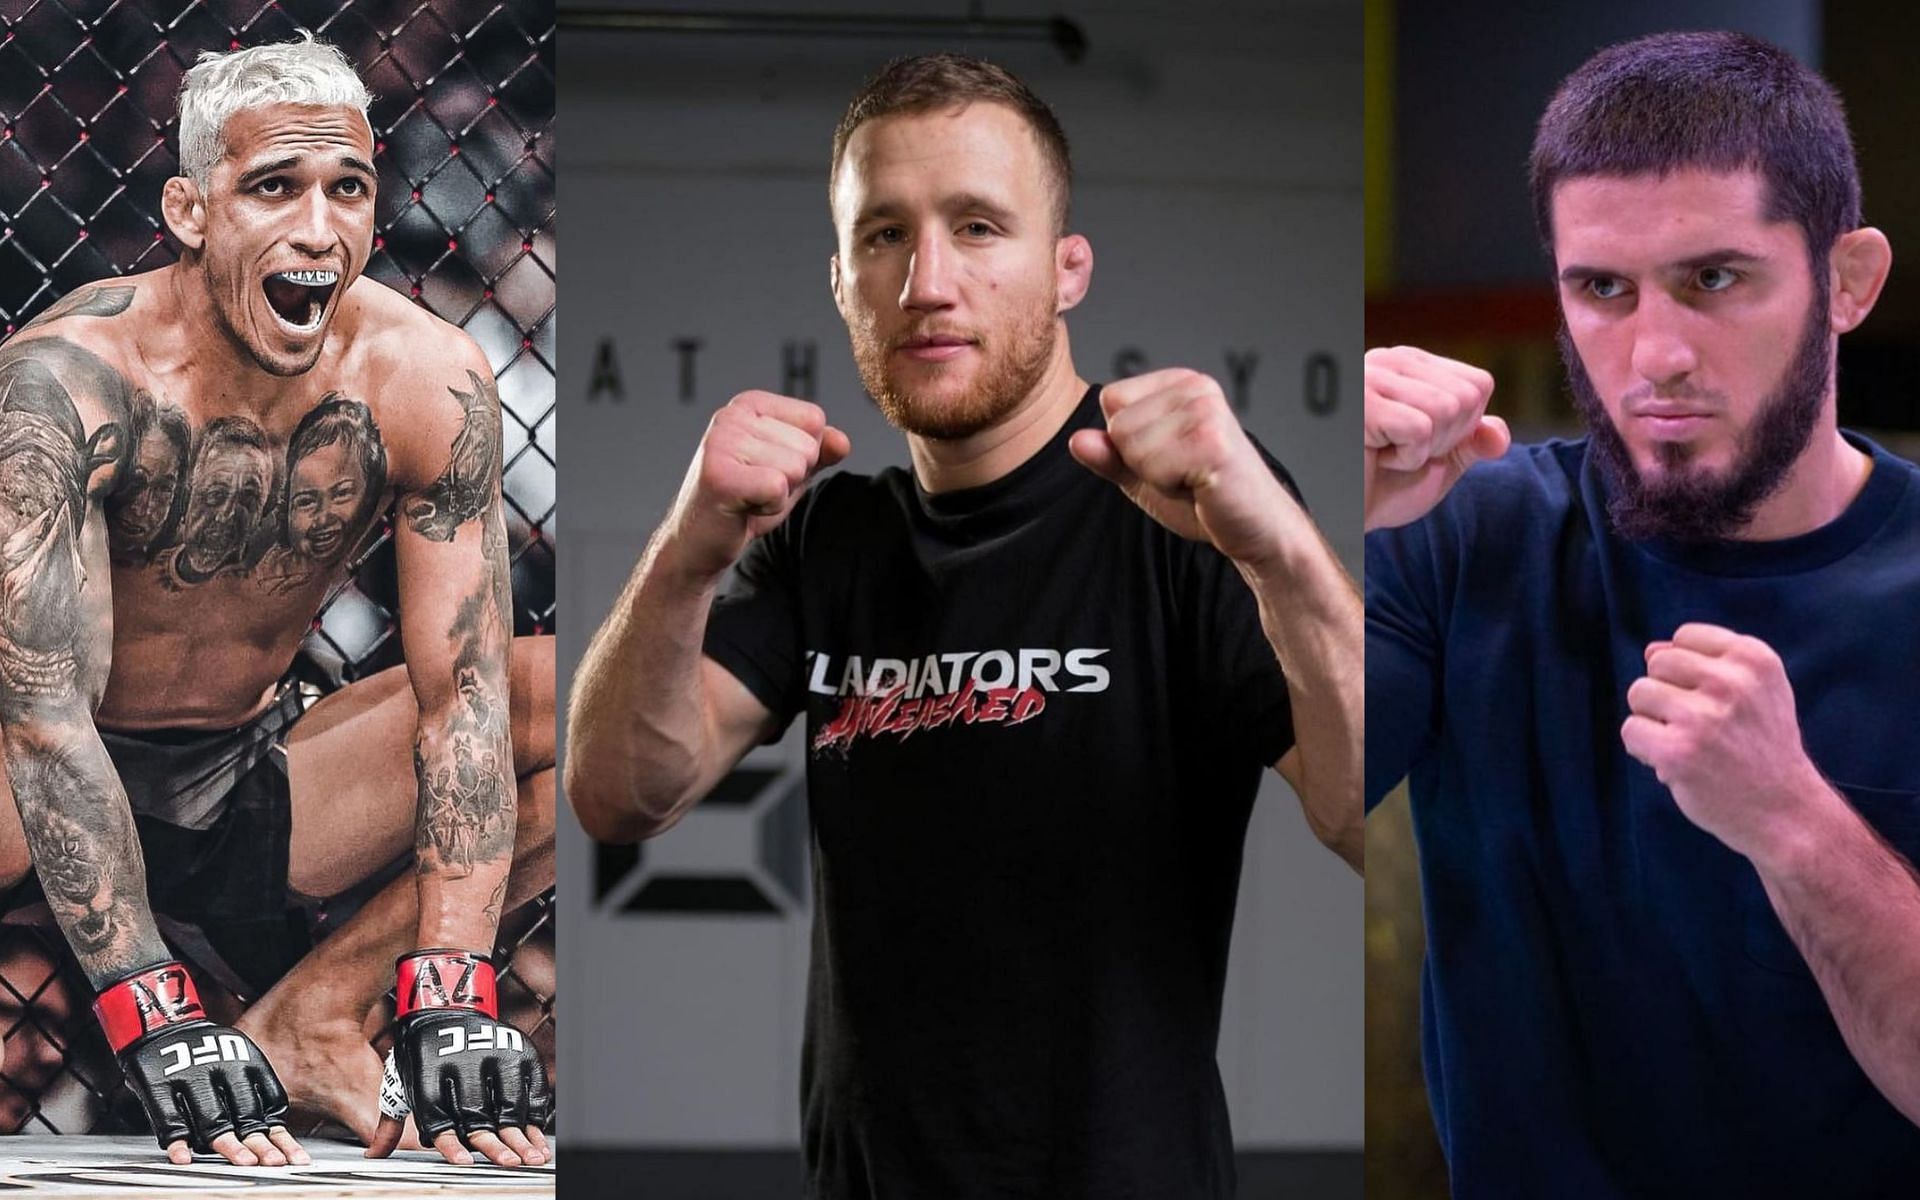 Left to right: Charles Oliveira, Justin Gaethje and Islam Makhachev [Images via: @charlesdobronxs, @justin_gaethje, and @islam_makhachev on Instagram]